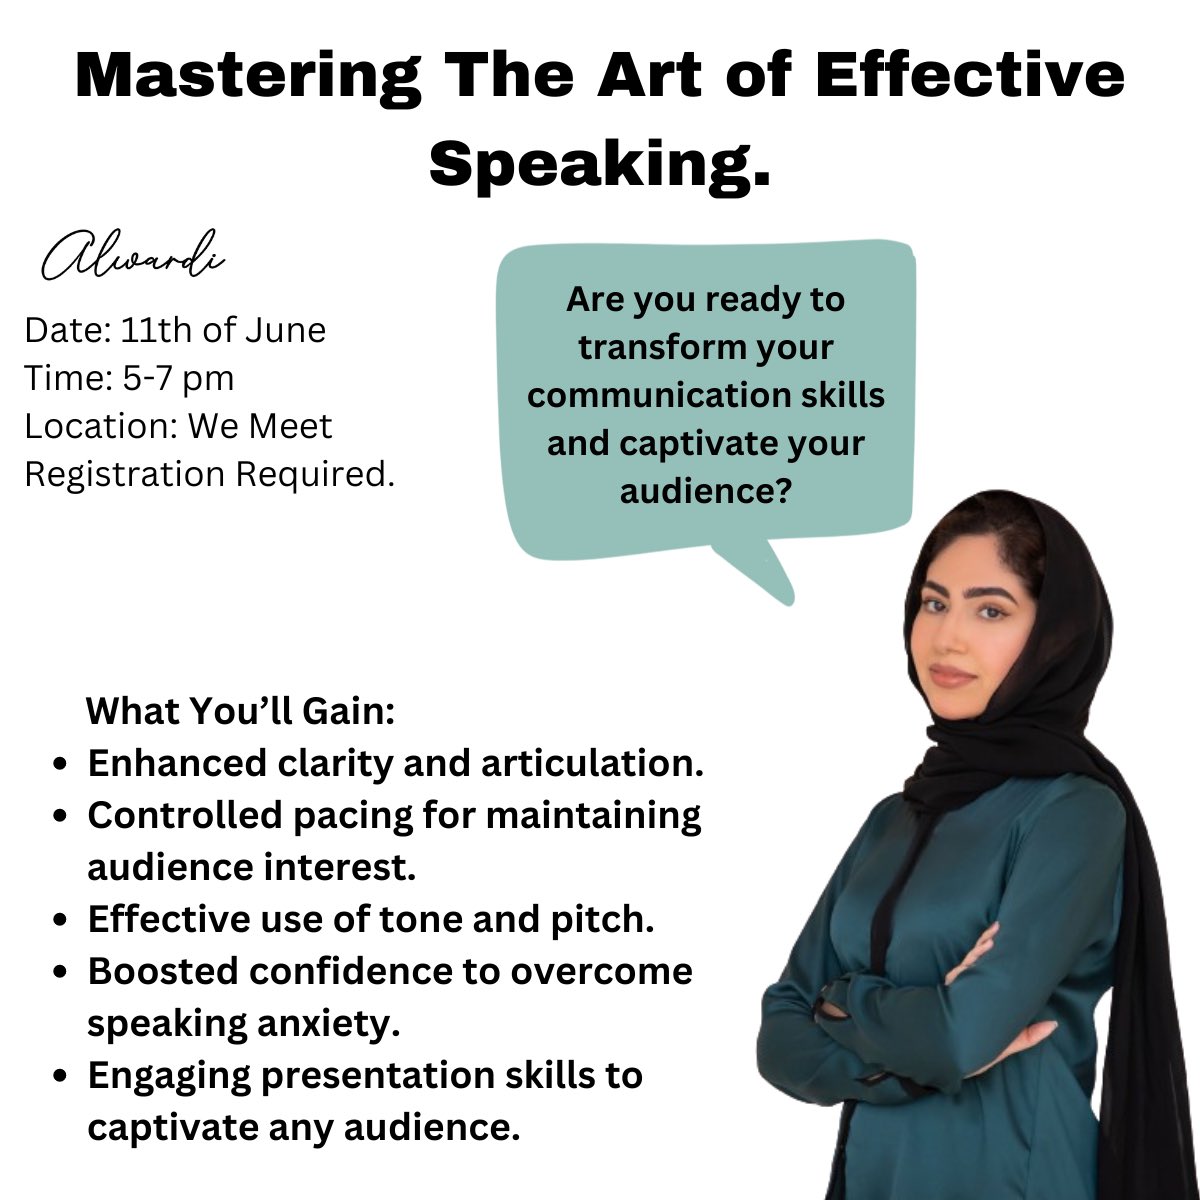 Join us for a dynamic and engaging course designed to help you master the art of effective speaking.